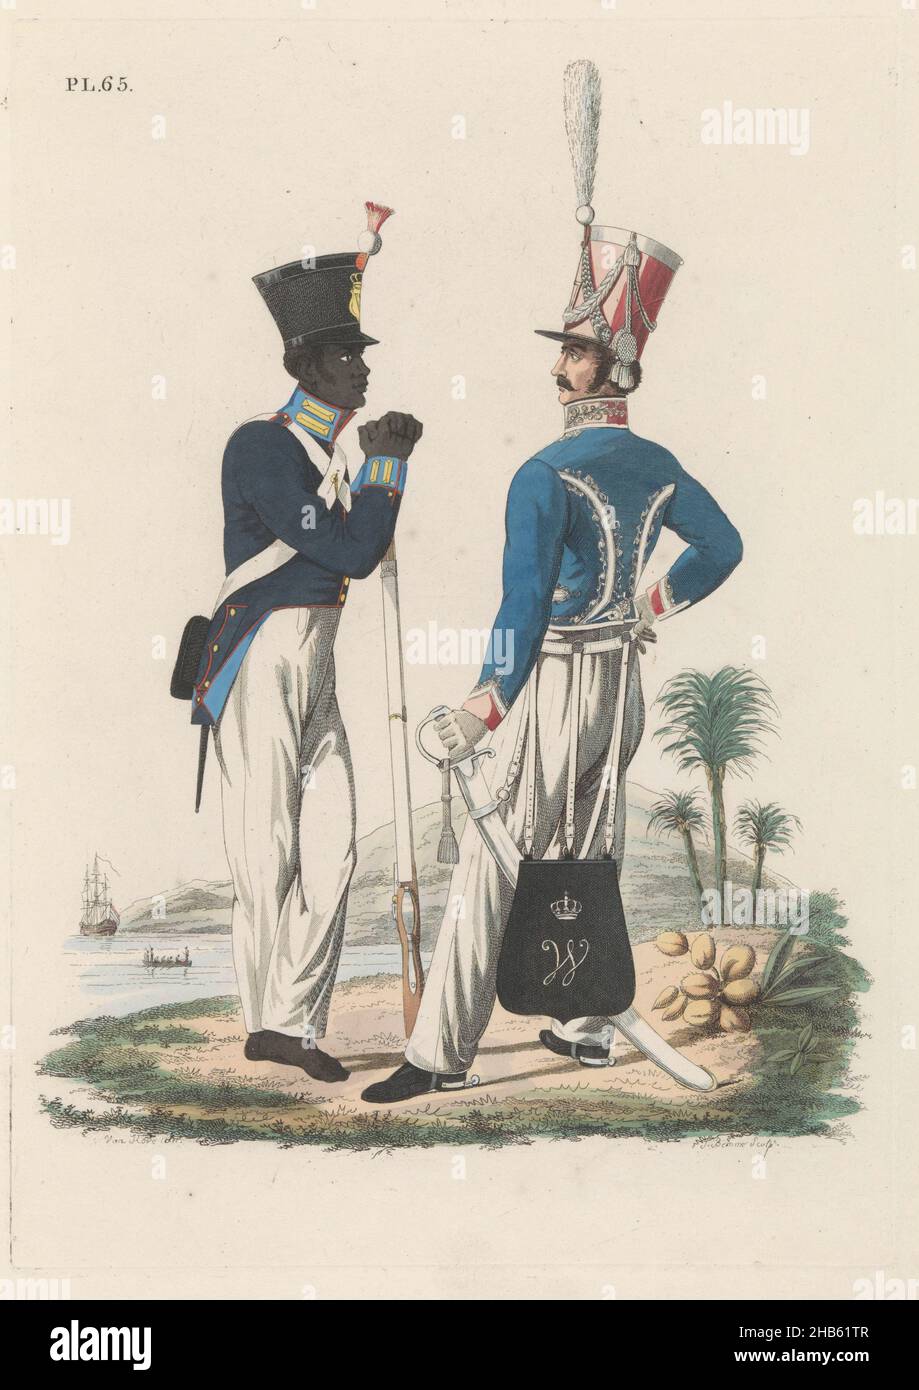 Hussaar, on foot, of Reg. no. 7, and Infanterist (Inlander). Troops in the East Indies (title on object), A Dutch hussar of the Regiment Huzaren No. 7 and a barefoot native infantryman. From the Dutch troops in the East Indies. Plate 65. The two standing on the waterfront. Uniform representation in 'Continuation of the Description as to the Royal Dutch troops' by J.F. Teupken, 1826., print maker: Joannes Bemme (mentioned on object), intermediary draughtsman: Bartholomeus Johannes van Hove (mentioned on object), print maker: Netherlands, intermediary draughtsman: Netherlands, printer: The Hague Stock Photo